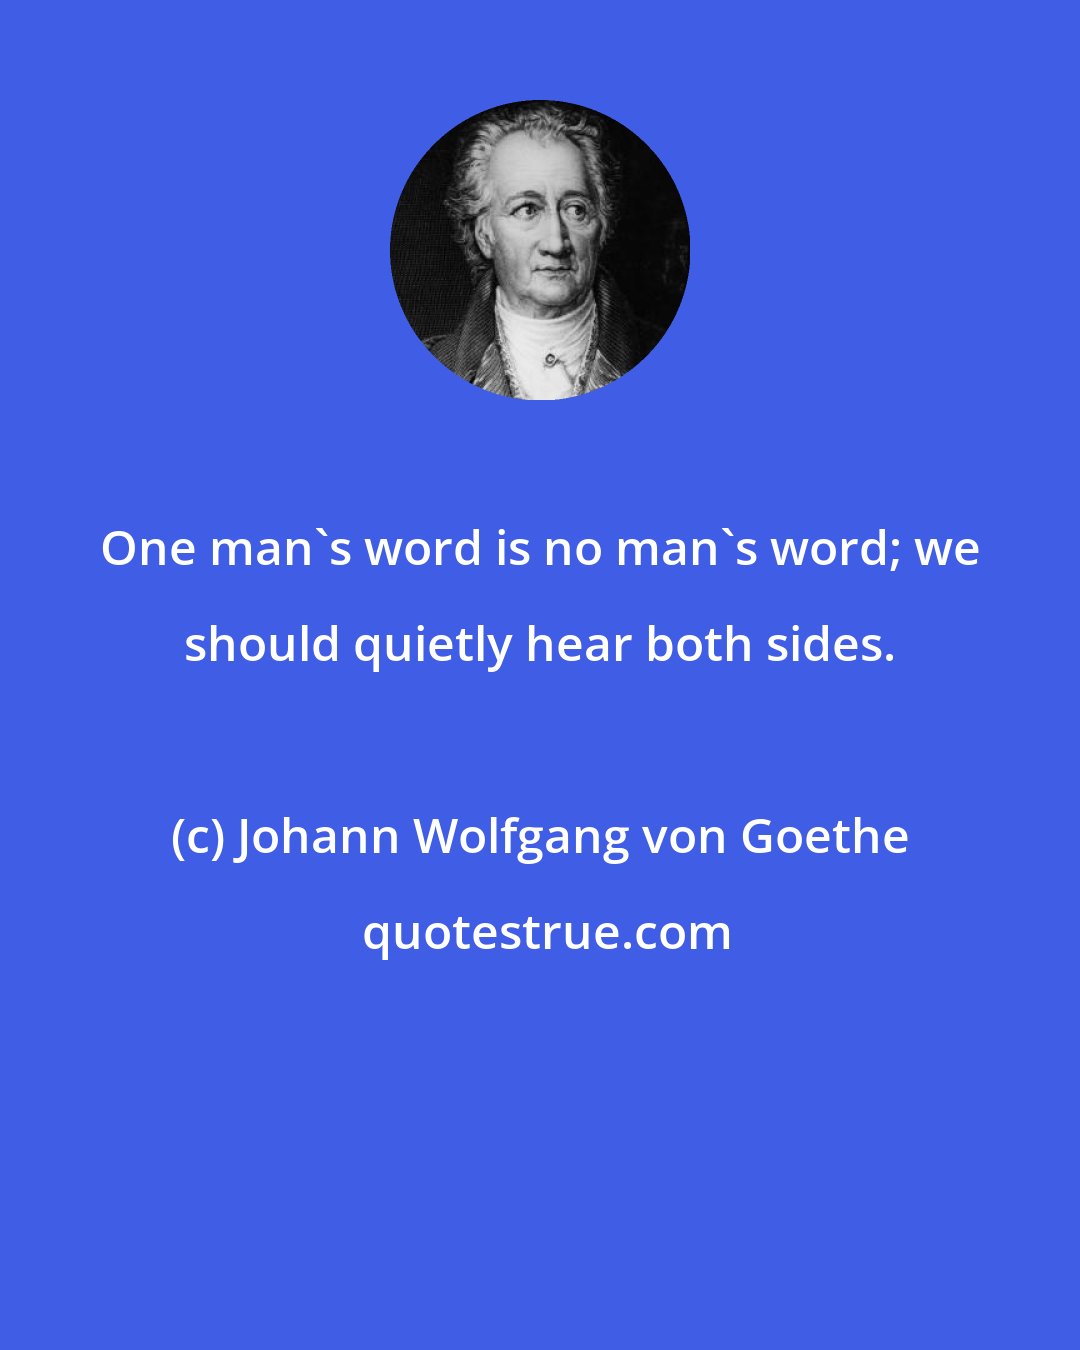 Johann Wolfgang von Goethe: One man's word is no man's word; we should quietly hear both sides.